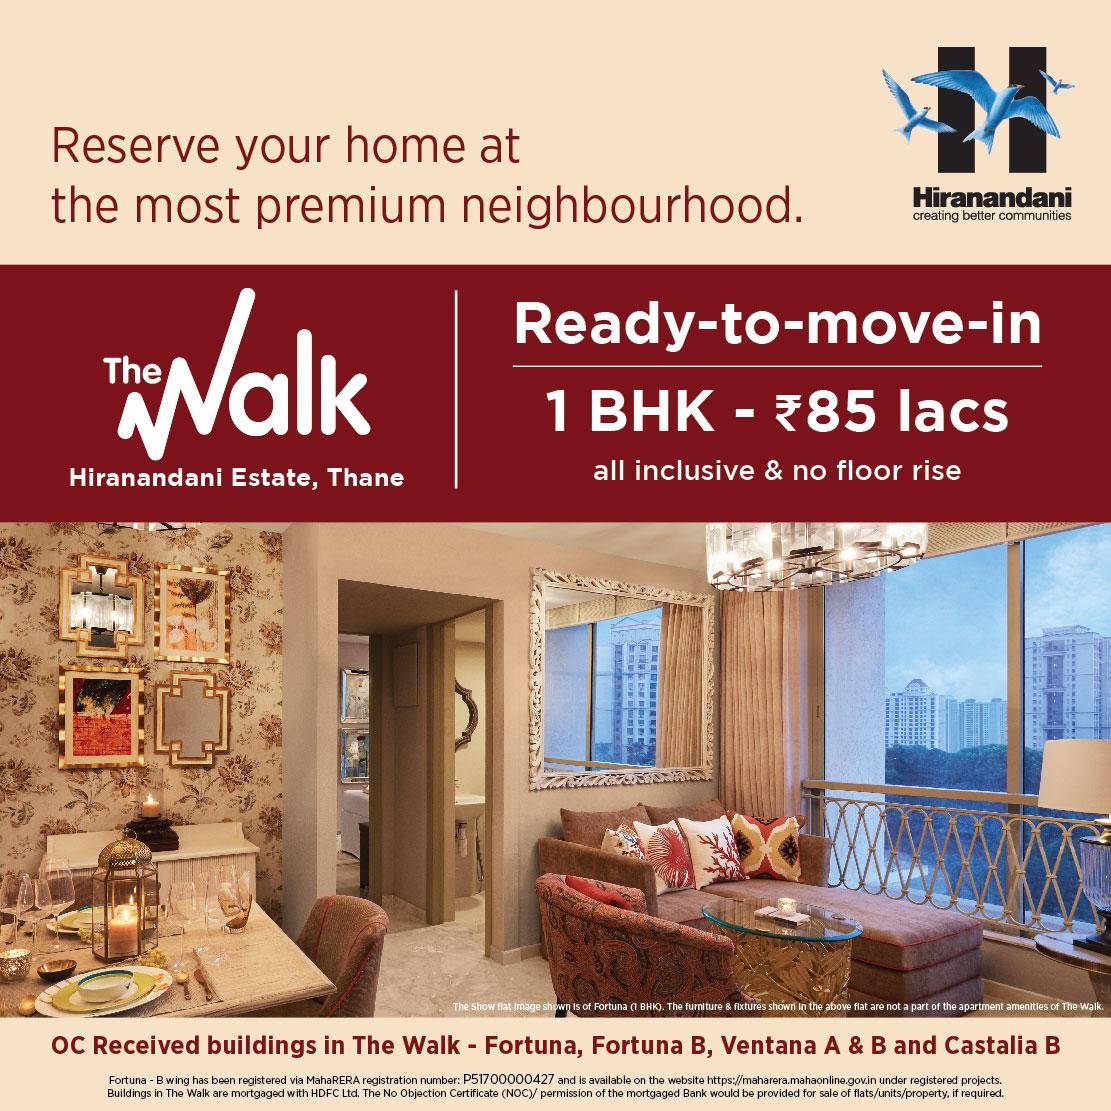 Ready to move in 1 BHK Rs 85 lakh at Hiranandani The Walk in Mumbai Update